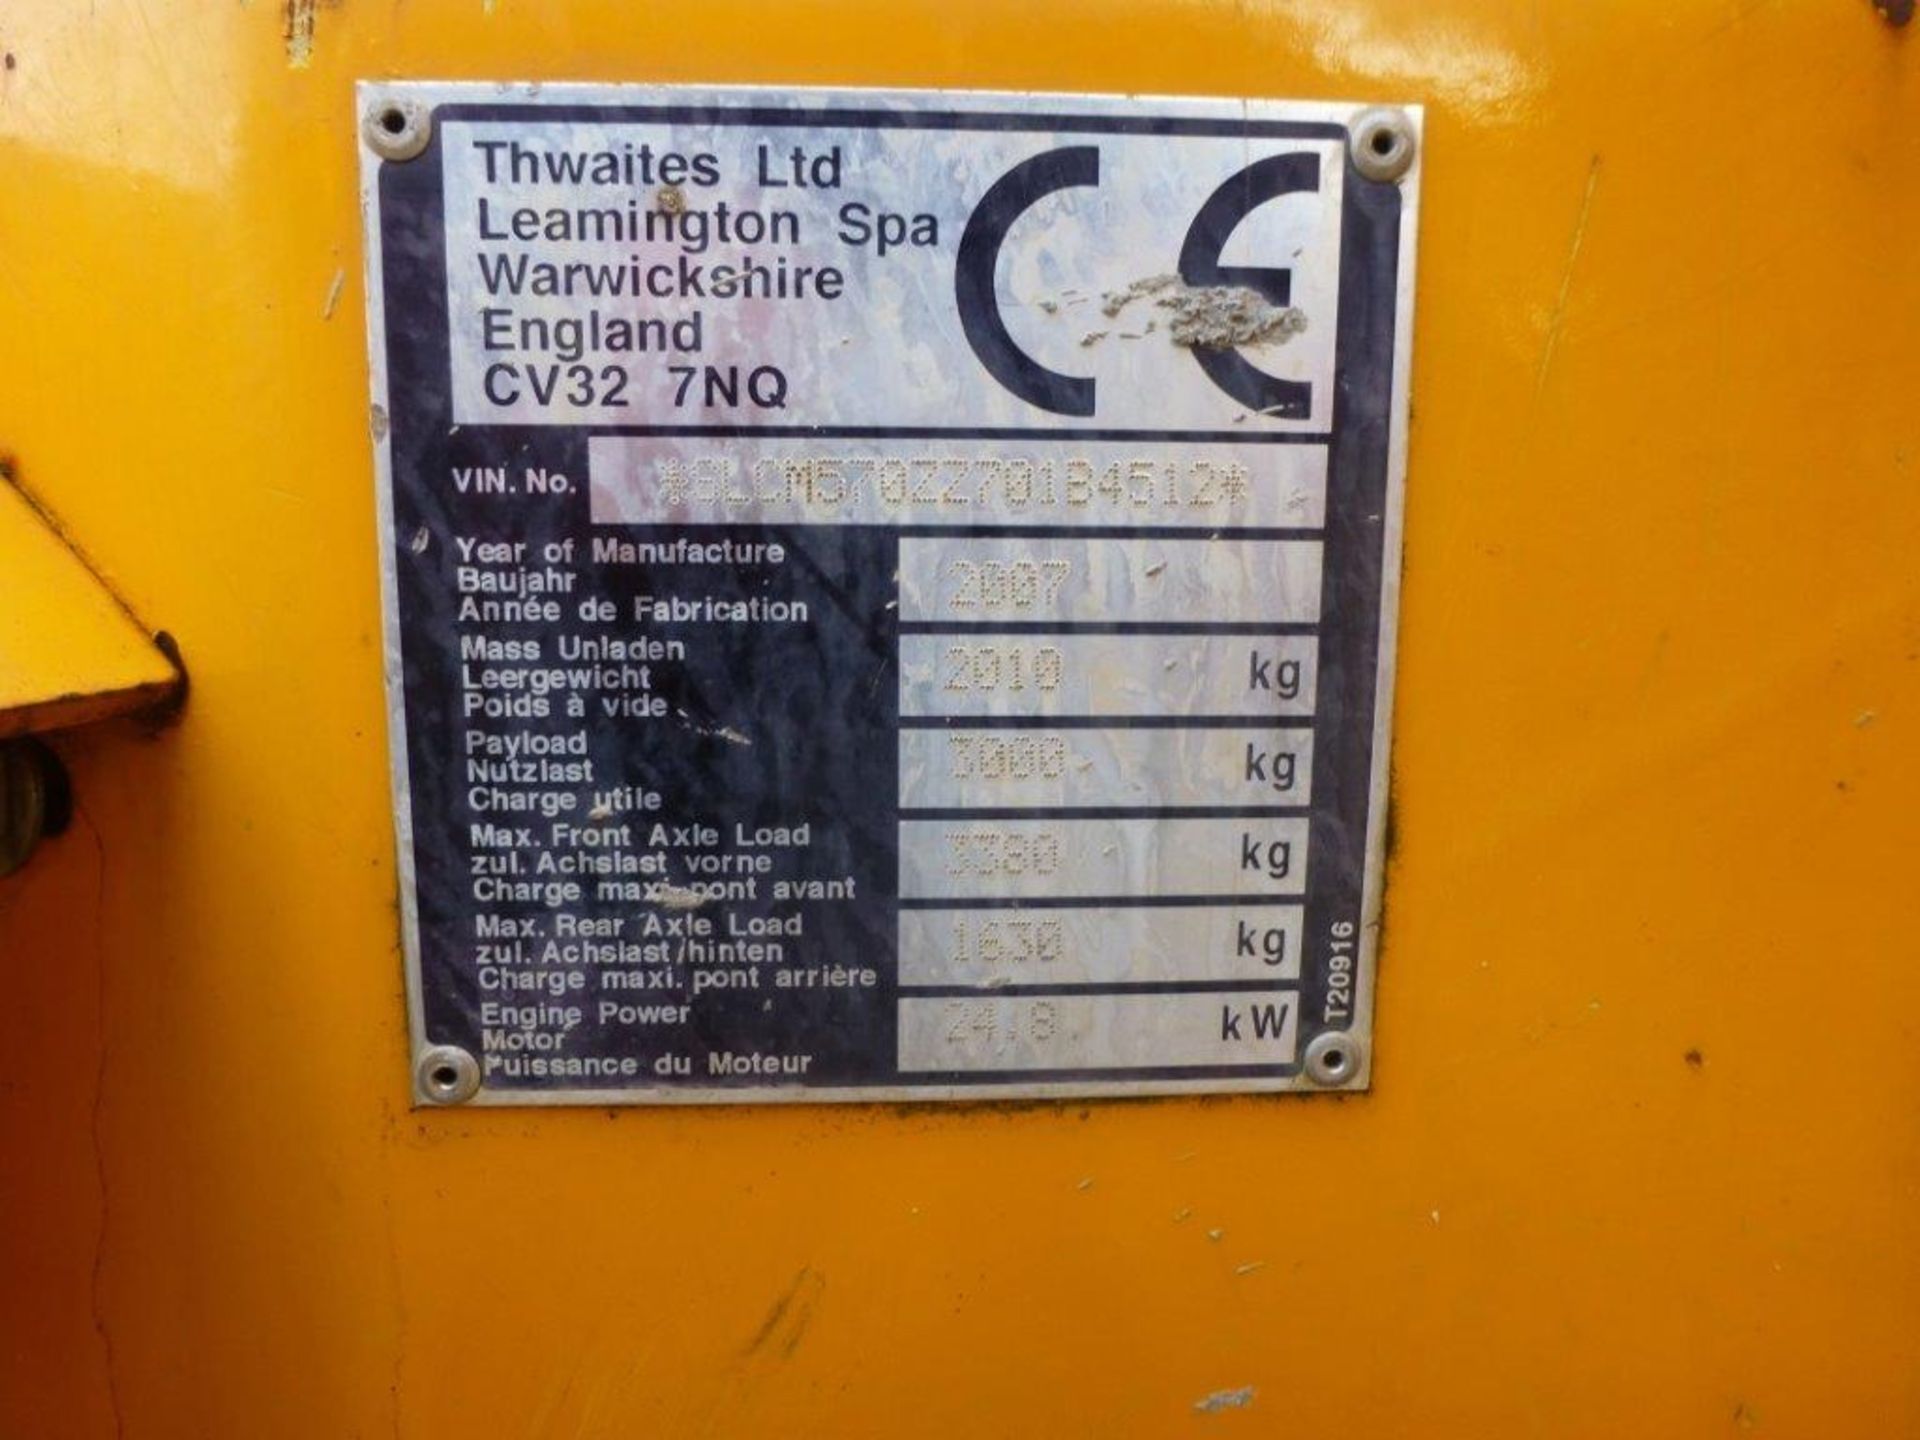 Thwaites 3-tonne articulated dumper (2007), indicated hours 693.2, weight 2010Kg, VIN no. - Image 5 of 5